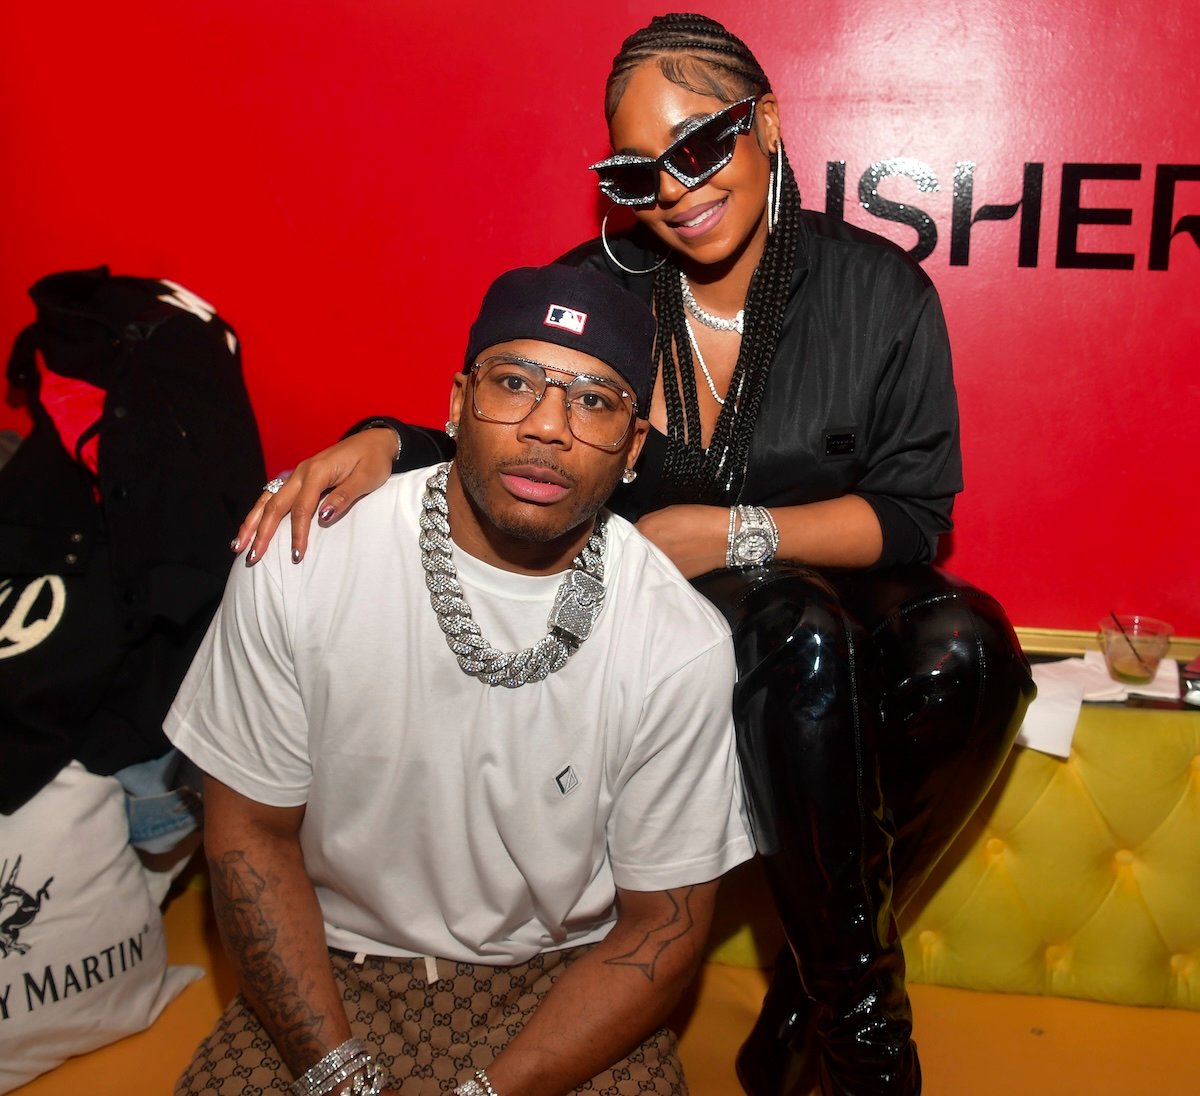 Couple Nelly and Ashanti sit together on a yellow couch at Usher's "Coming Home" Album Release party